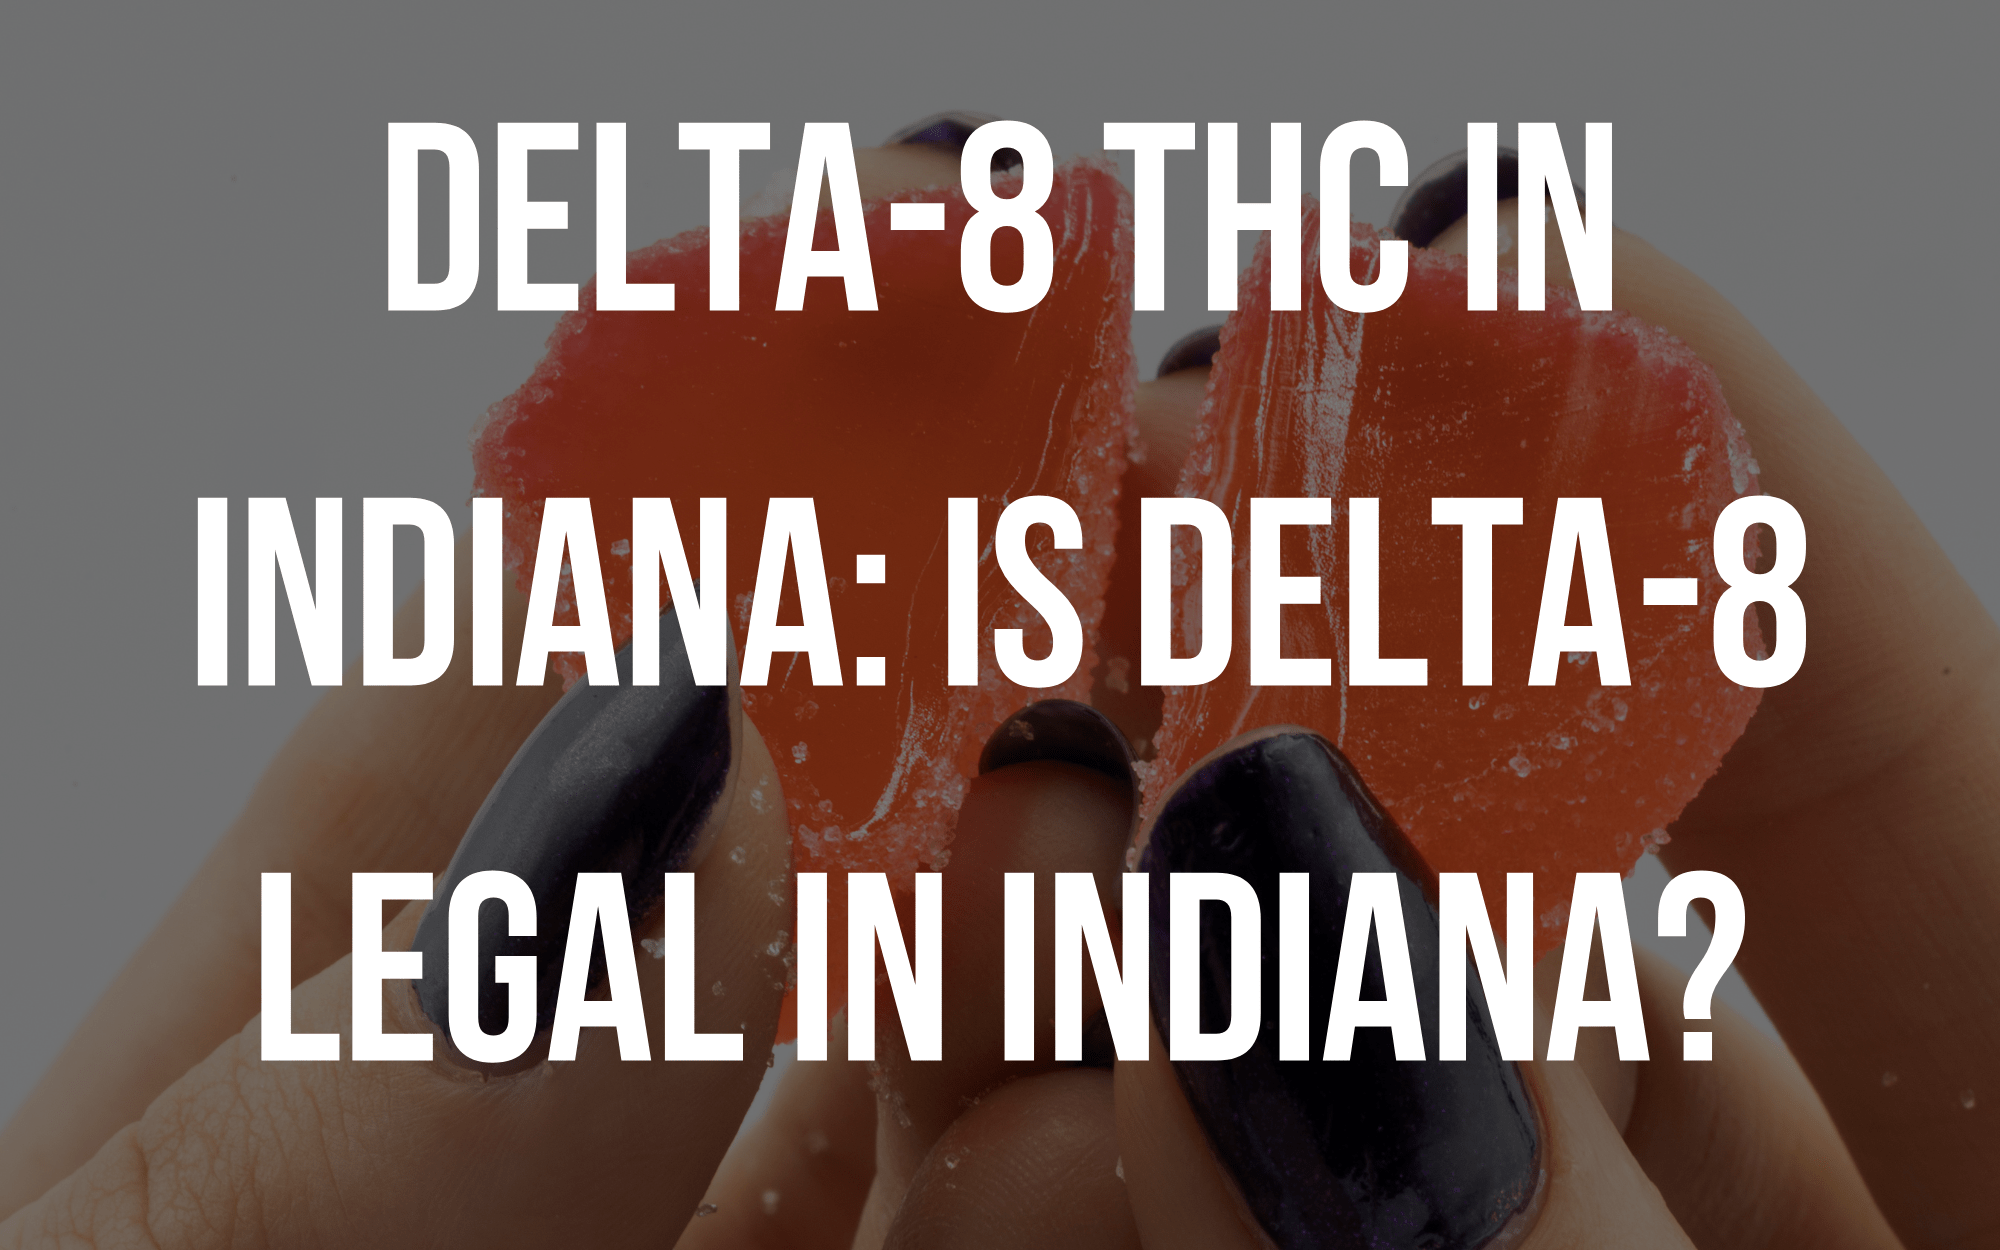 Is it Delta-8 Legal In Indiana